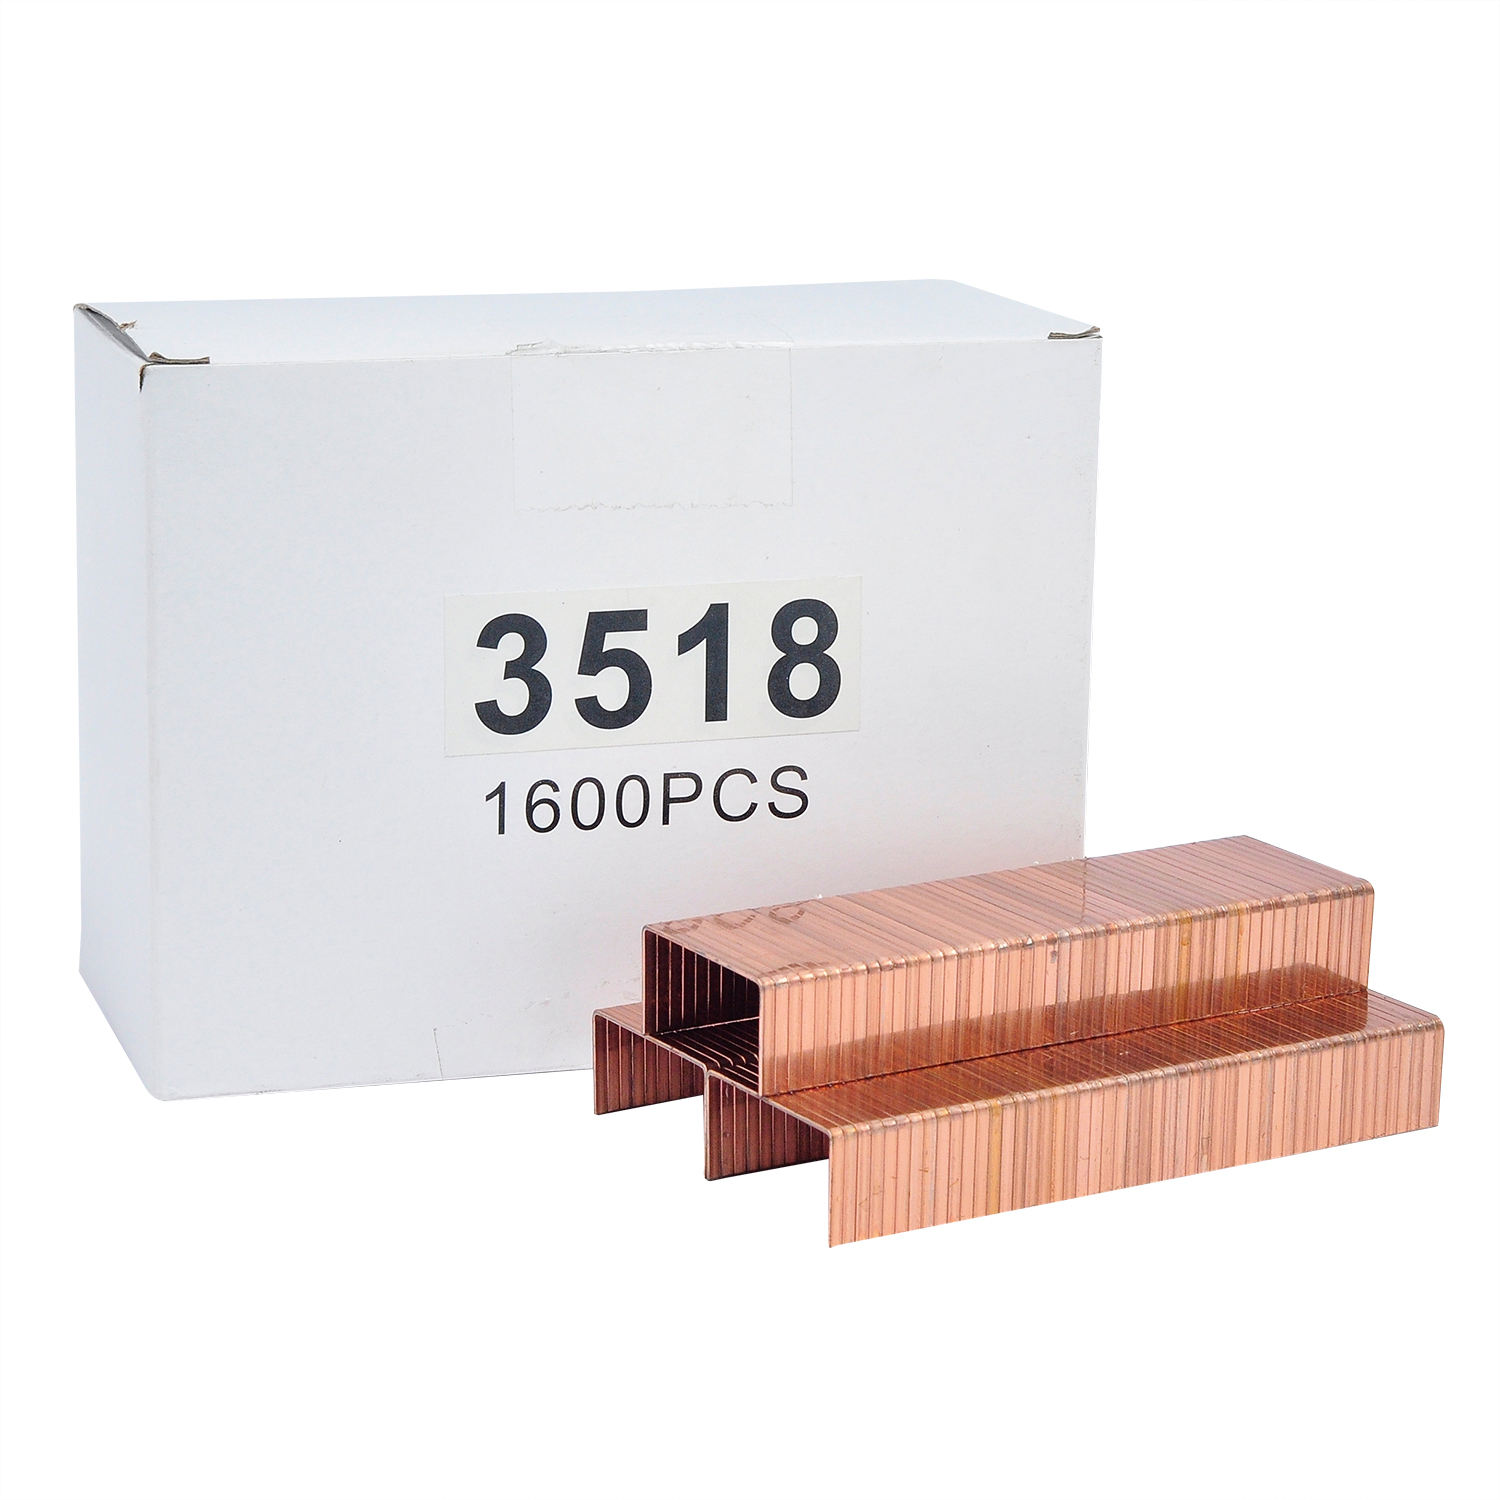 3518 Fastener Nails Staples Copper Coated Industrial Carton Closing Staples